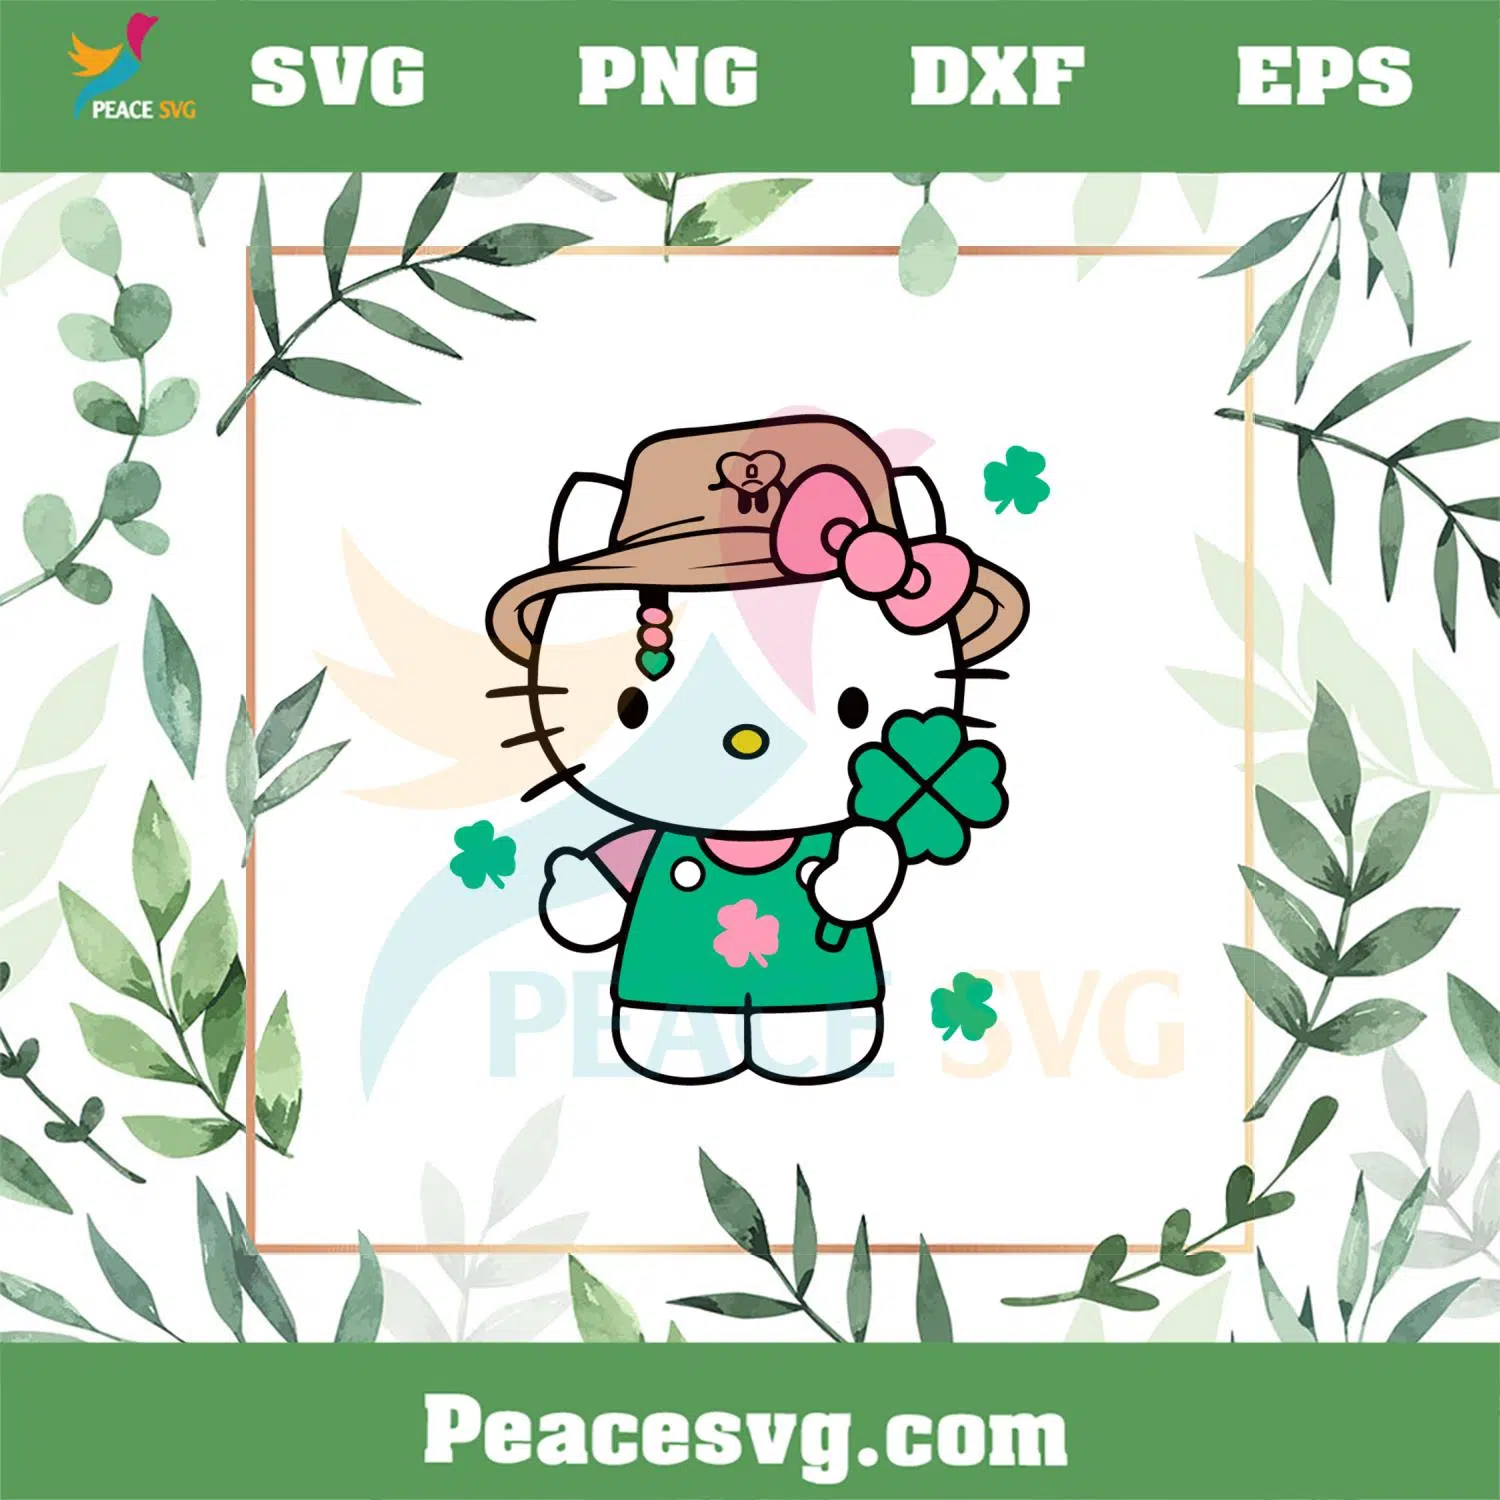 Benito’s Luckiest Clover St Patrick’s Day Hello Kitty SVG Cutting Files